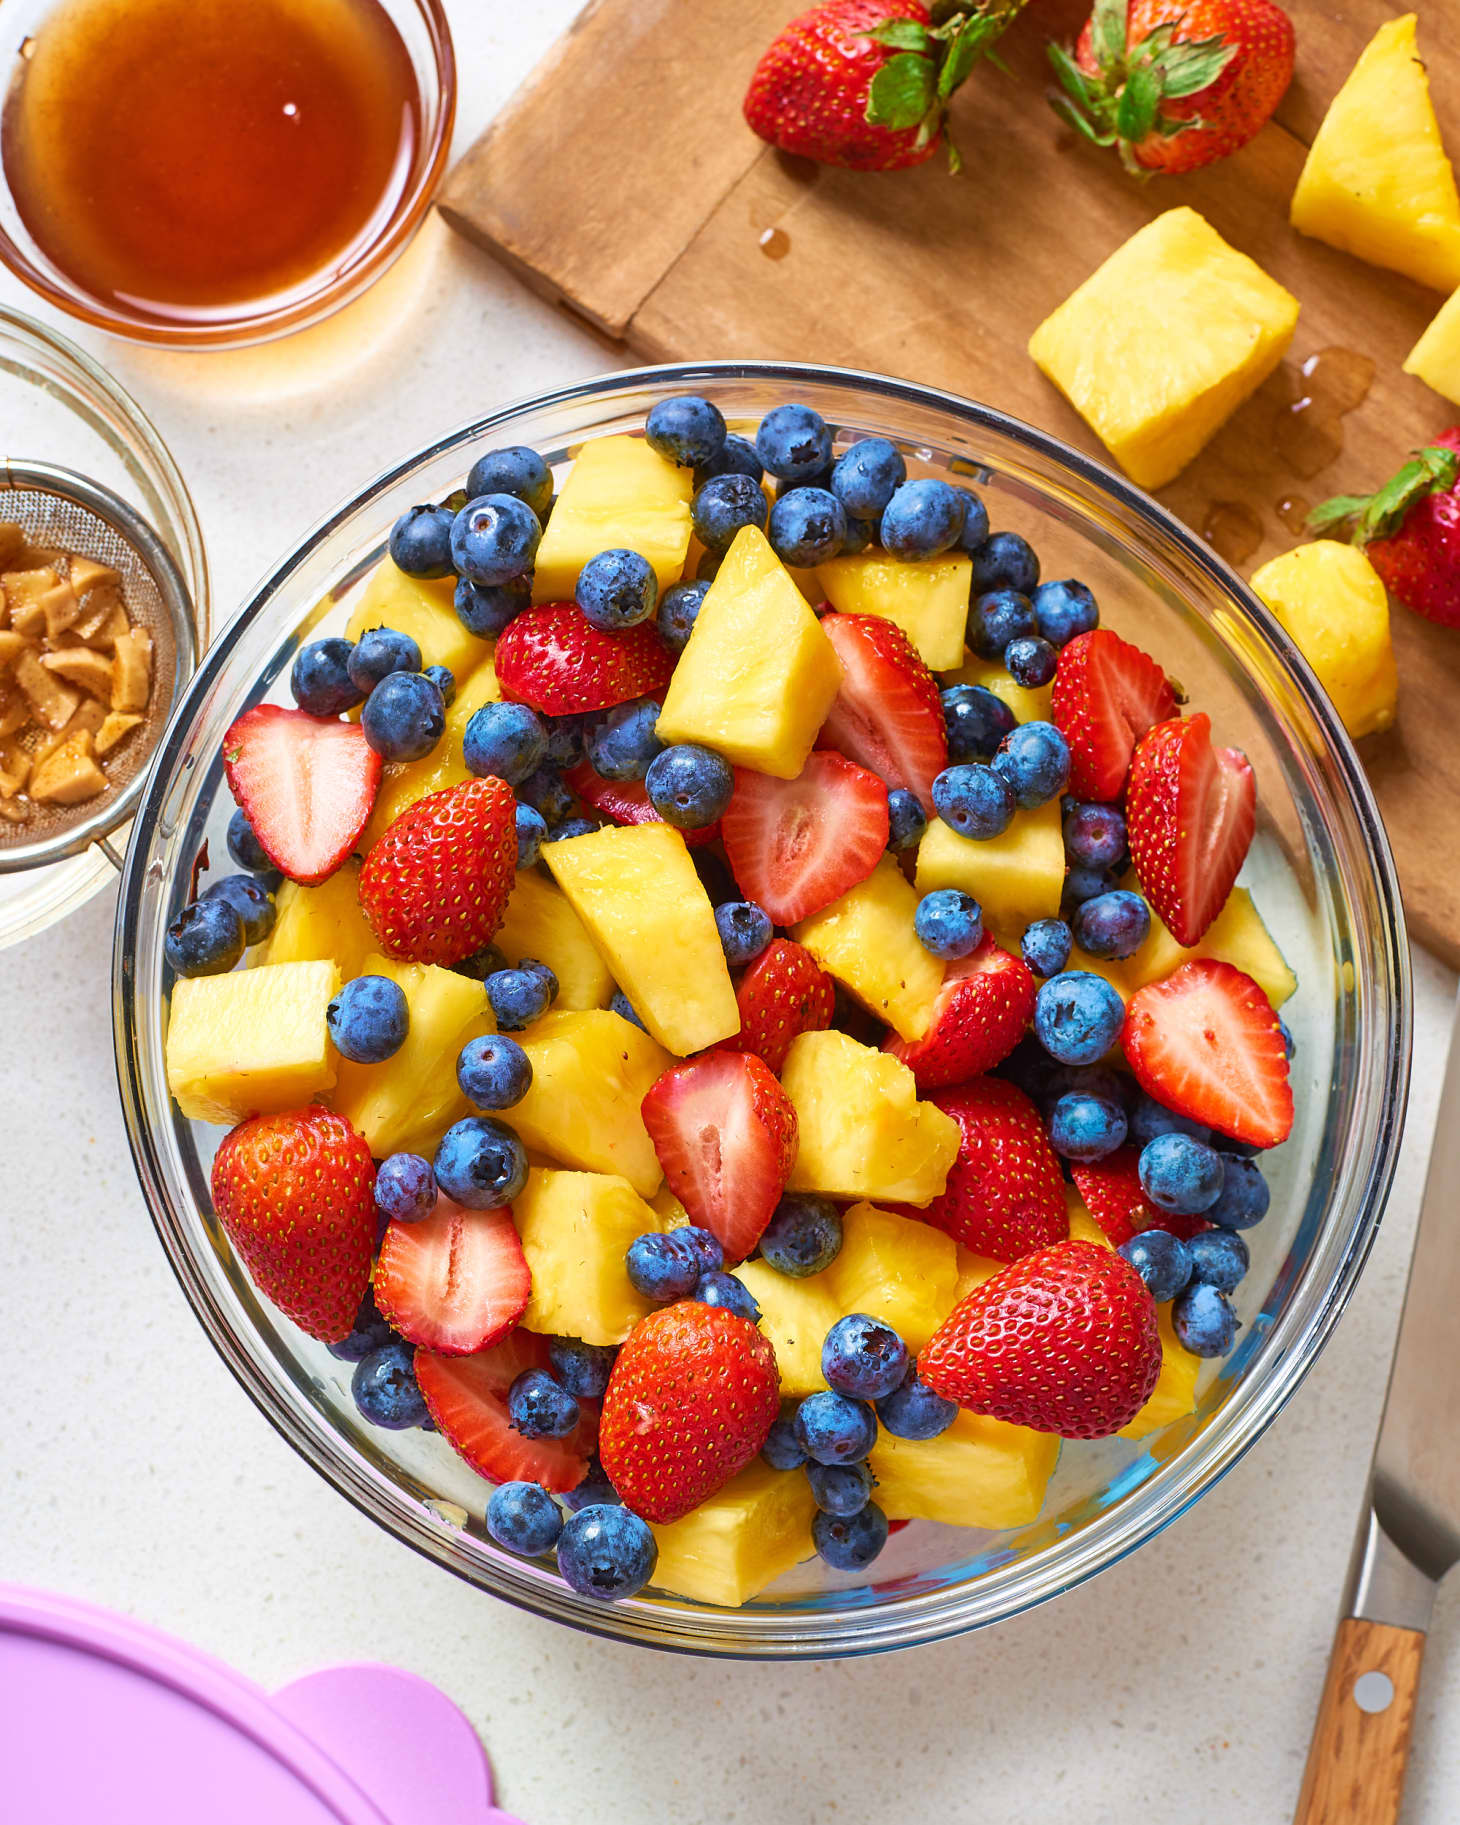 potluck-fruit-salad-with-berries-pineapple-kitchn-kitchn